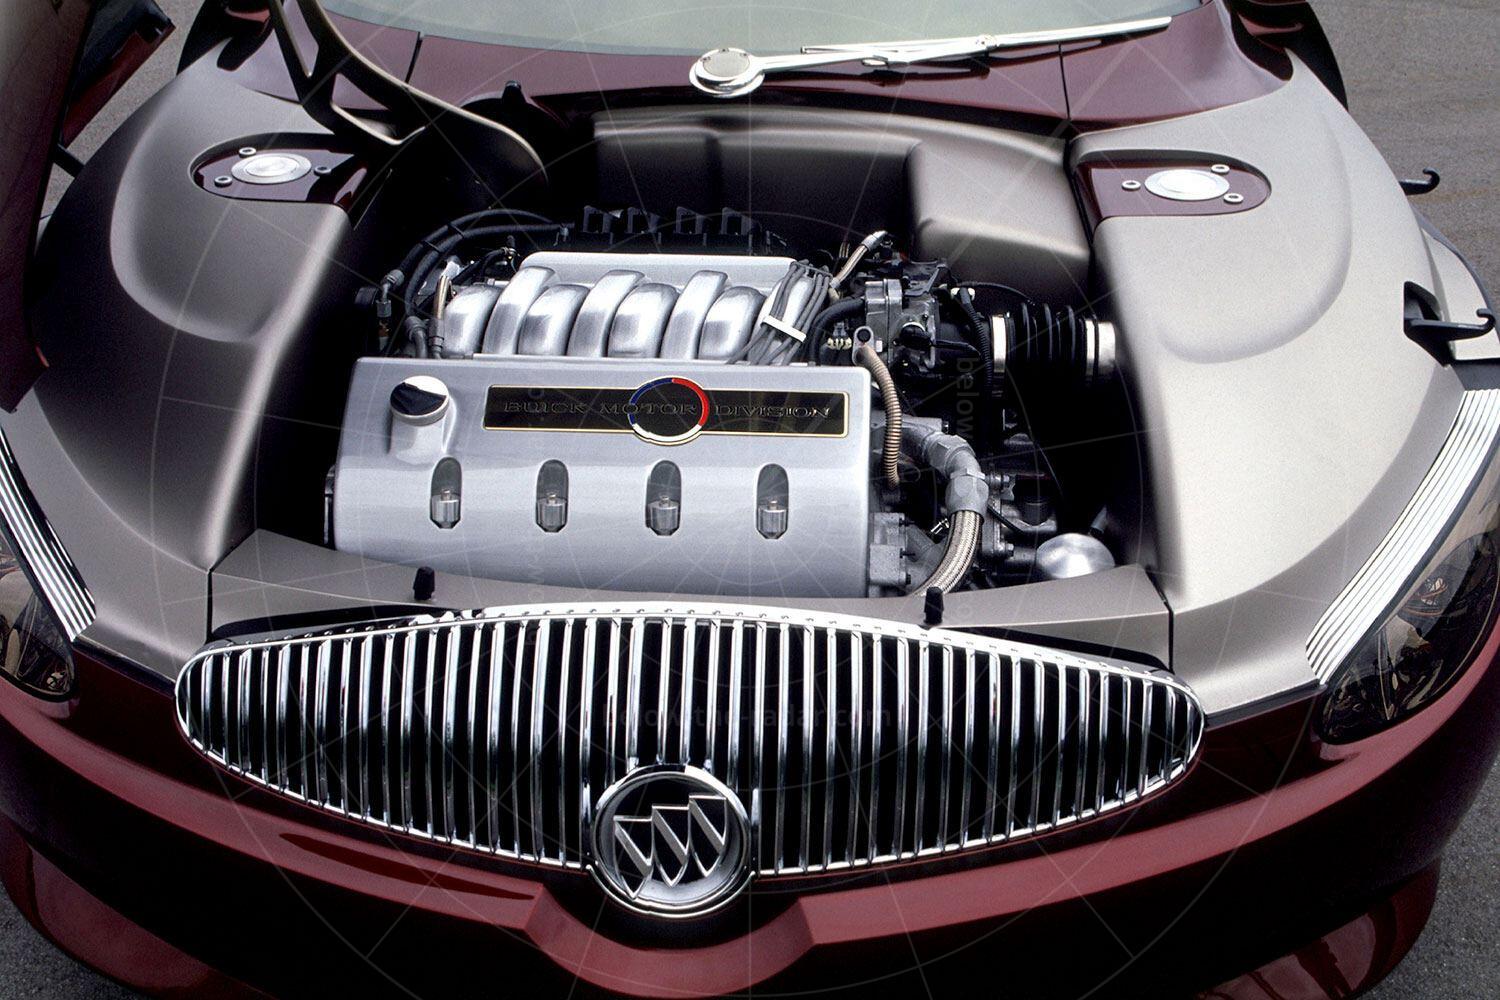 Buick LaCrosse concept engine bay Pic: Buick | Buick LaCrosse concept engine bay